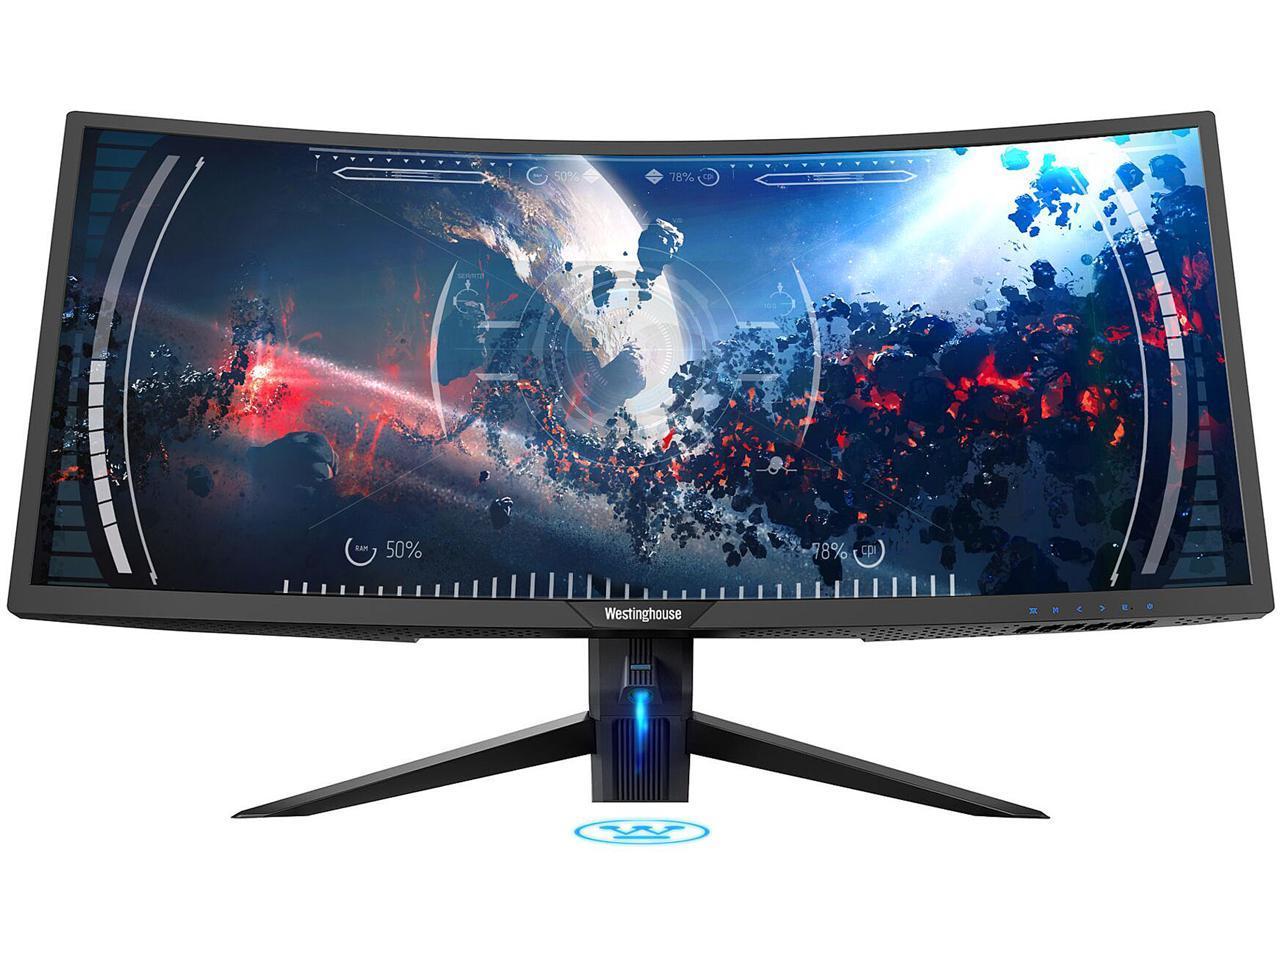 Westinghouse WC34DX9019 34in UWQHD Widescreen Curved Monitor for $329.99 Shipped